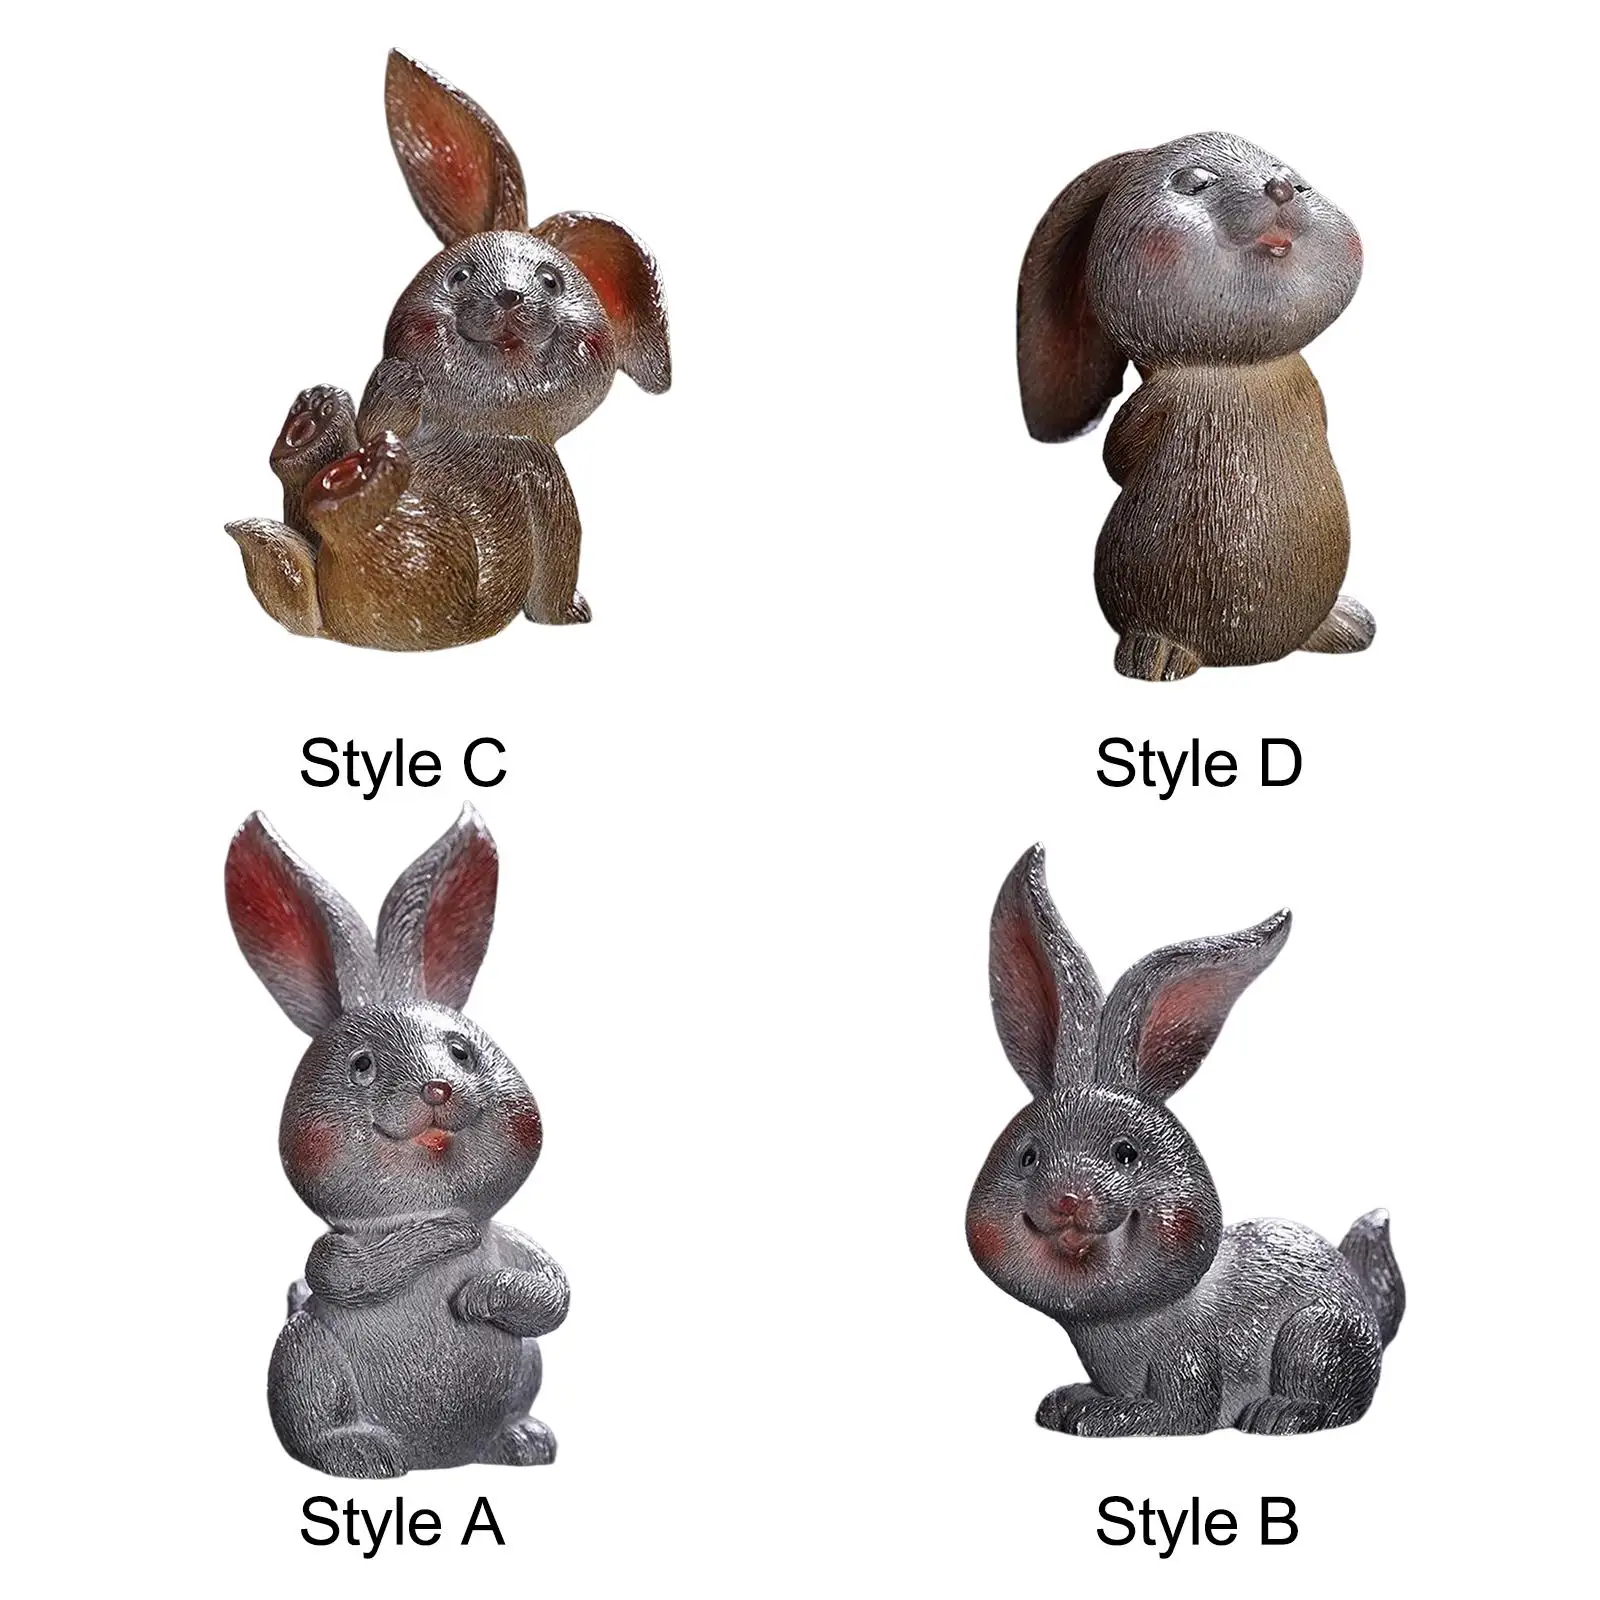 Color Changing Tea Pet Kung Fu Tea Ornament Water Tray Accessories Bunny Figurine for Tea Set Gift Desk Home Ceremony Decoration